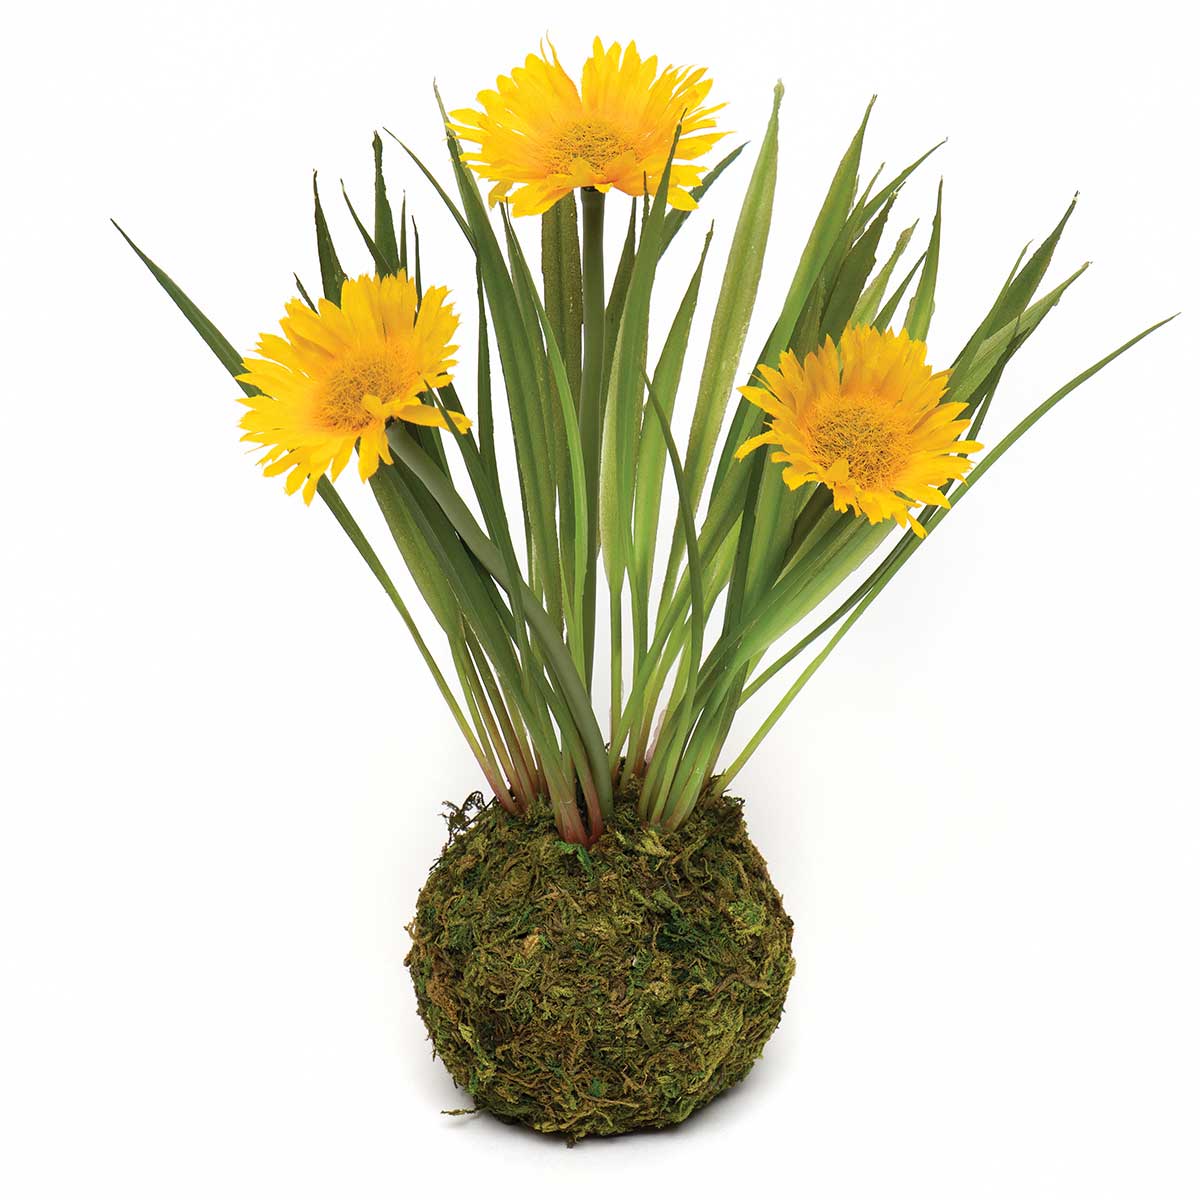 !MUM X3 WITH FAUX DIRT/MOSS 6"X8" YELLOW